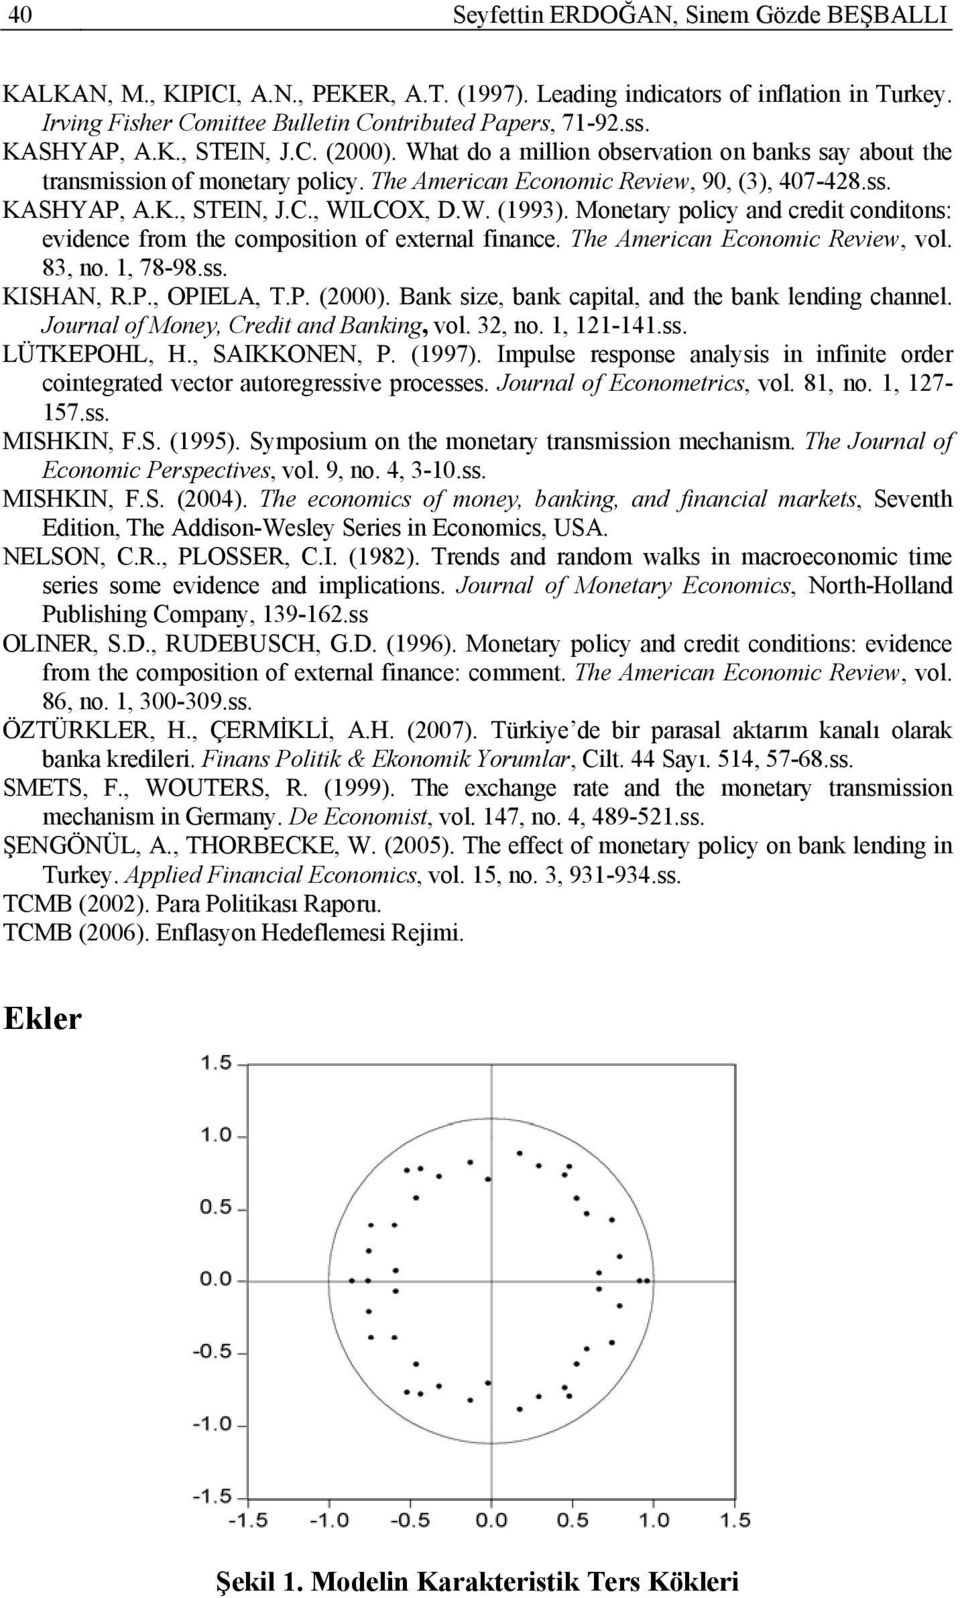 W. (1993). Monetary policy and credit conditons: evidence from the composition of external finance. The American Economic Review, vol. 83, no. 1, 78-98.ss. KISHAN, R.P., OPIELA, T.P. (2000).